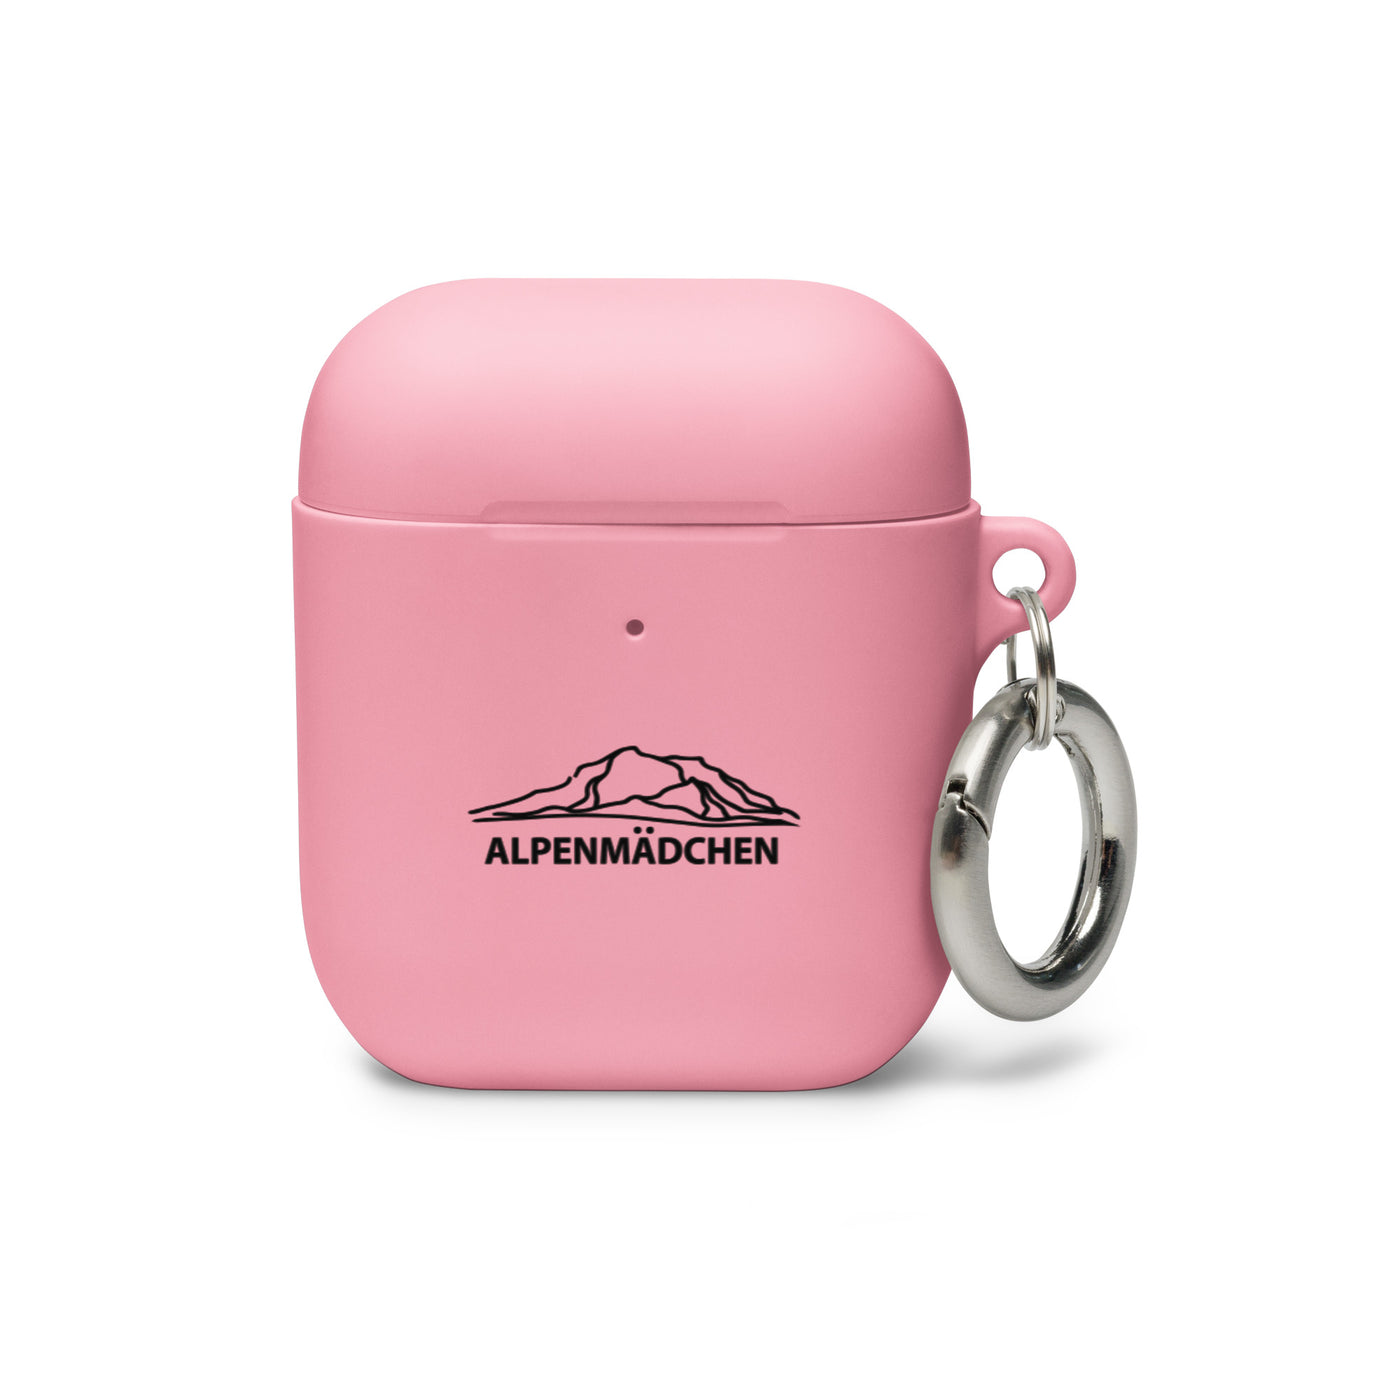 Alpenmadchen - (9) - AirPods Case berge Pink AirPods